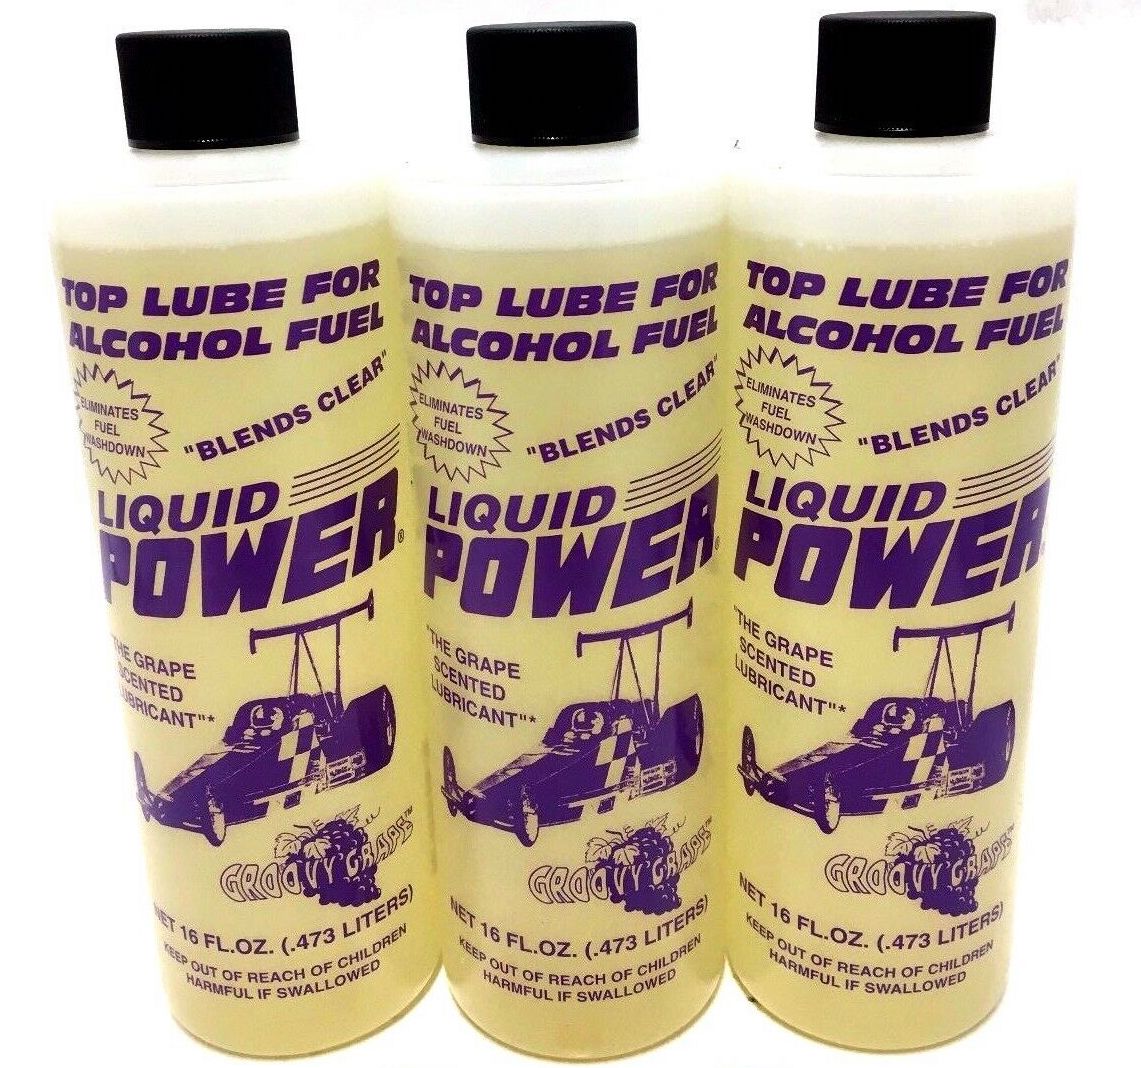 PowerPlus GRAPE Scented Lubricants Alcohol Top Lube 16oz-Liquid Power Upper Cylinder Lube - 3 PACK